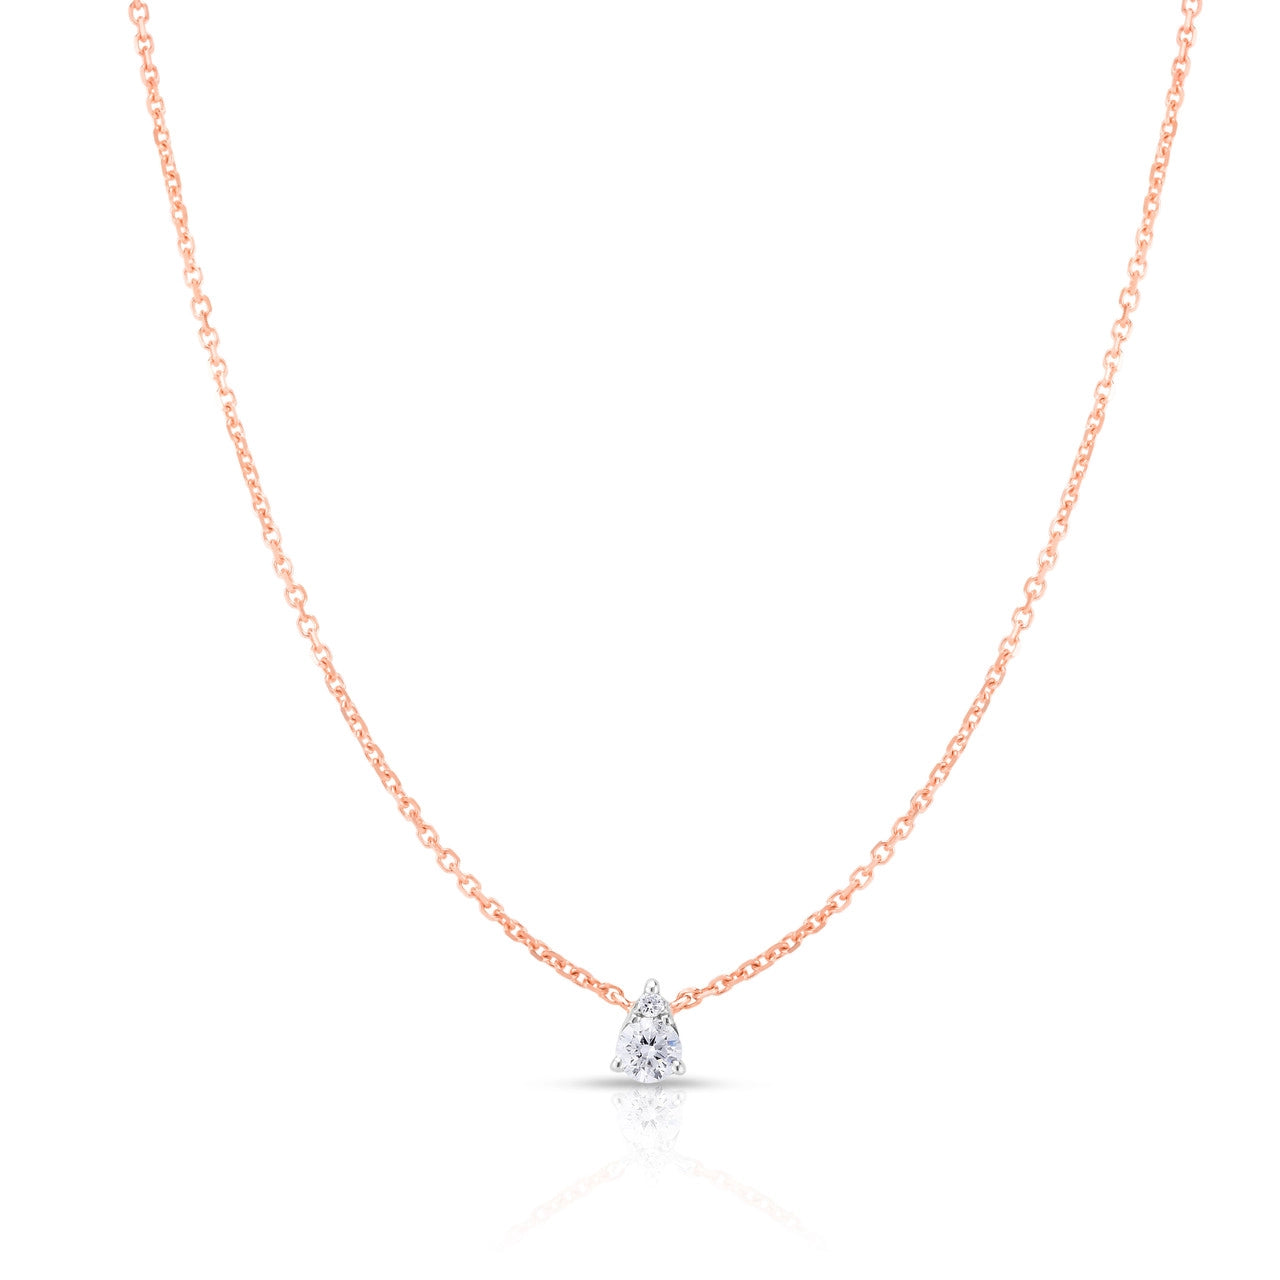 Pear Illusion Diamond Necklace in Rose Gold